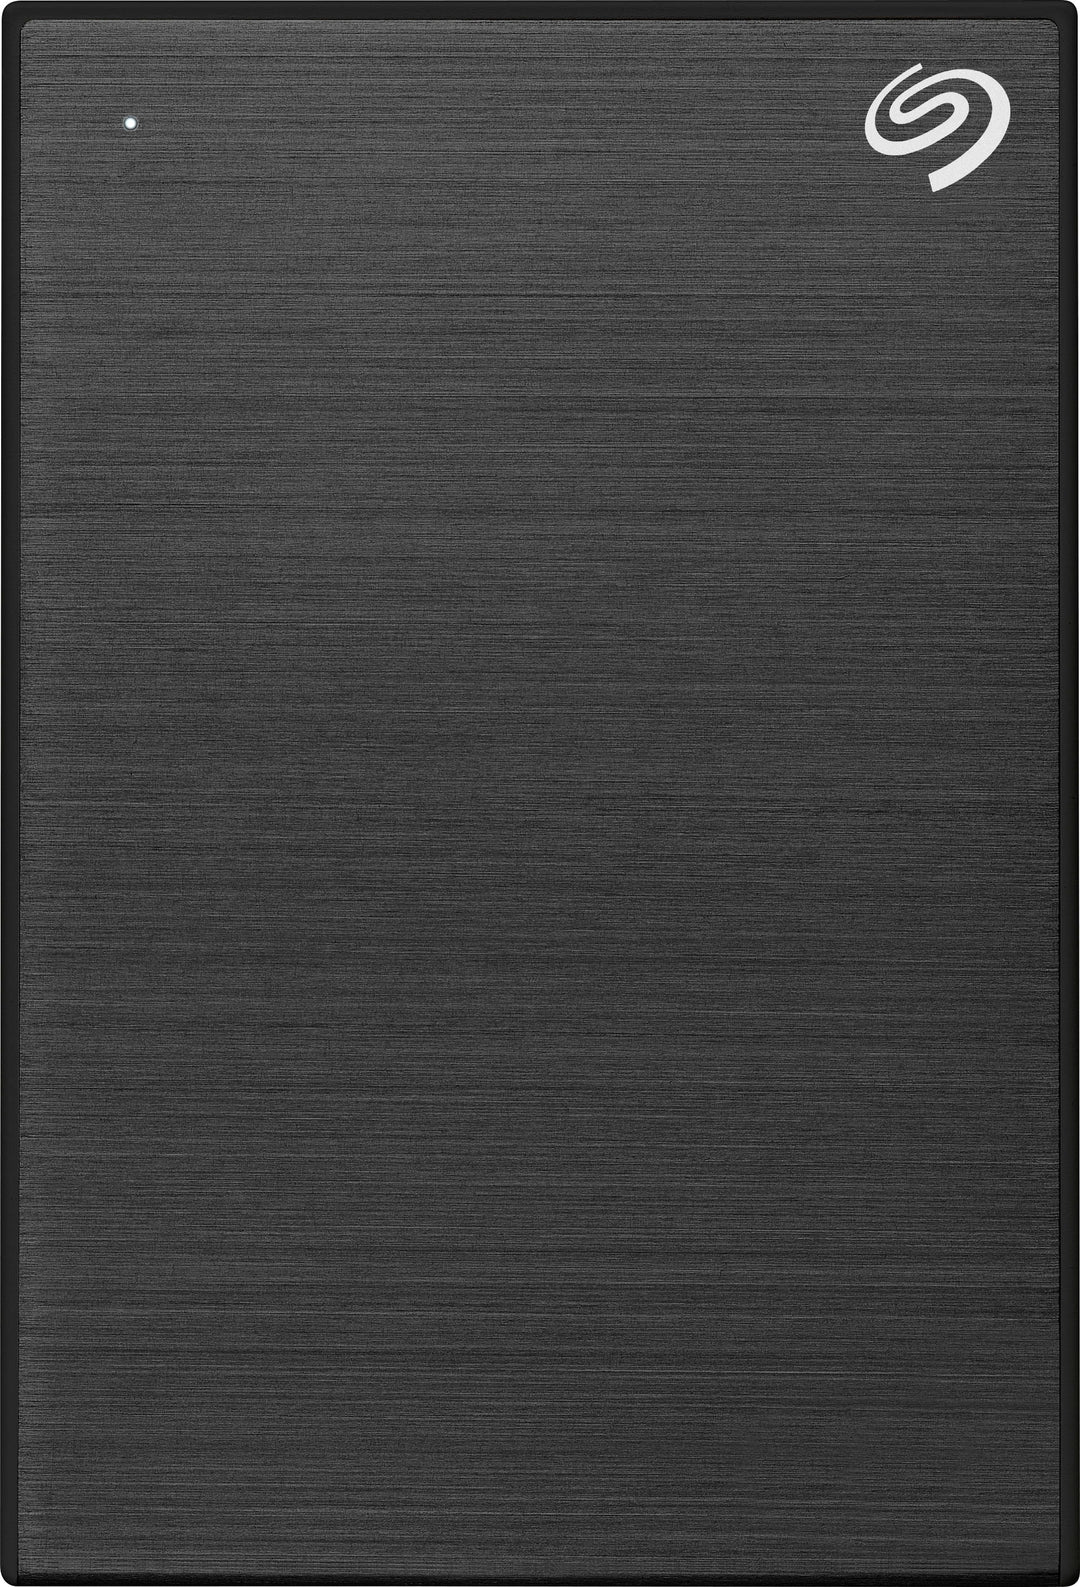 Seagate - One Touch with Password 4TB External USB 3.0 Portable Hard Drive with Rescue Data Recovery Services - Black_1